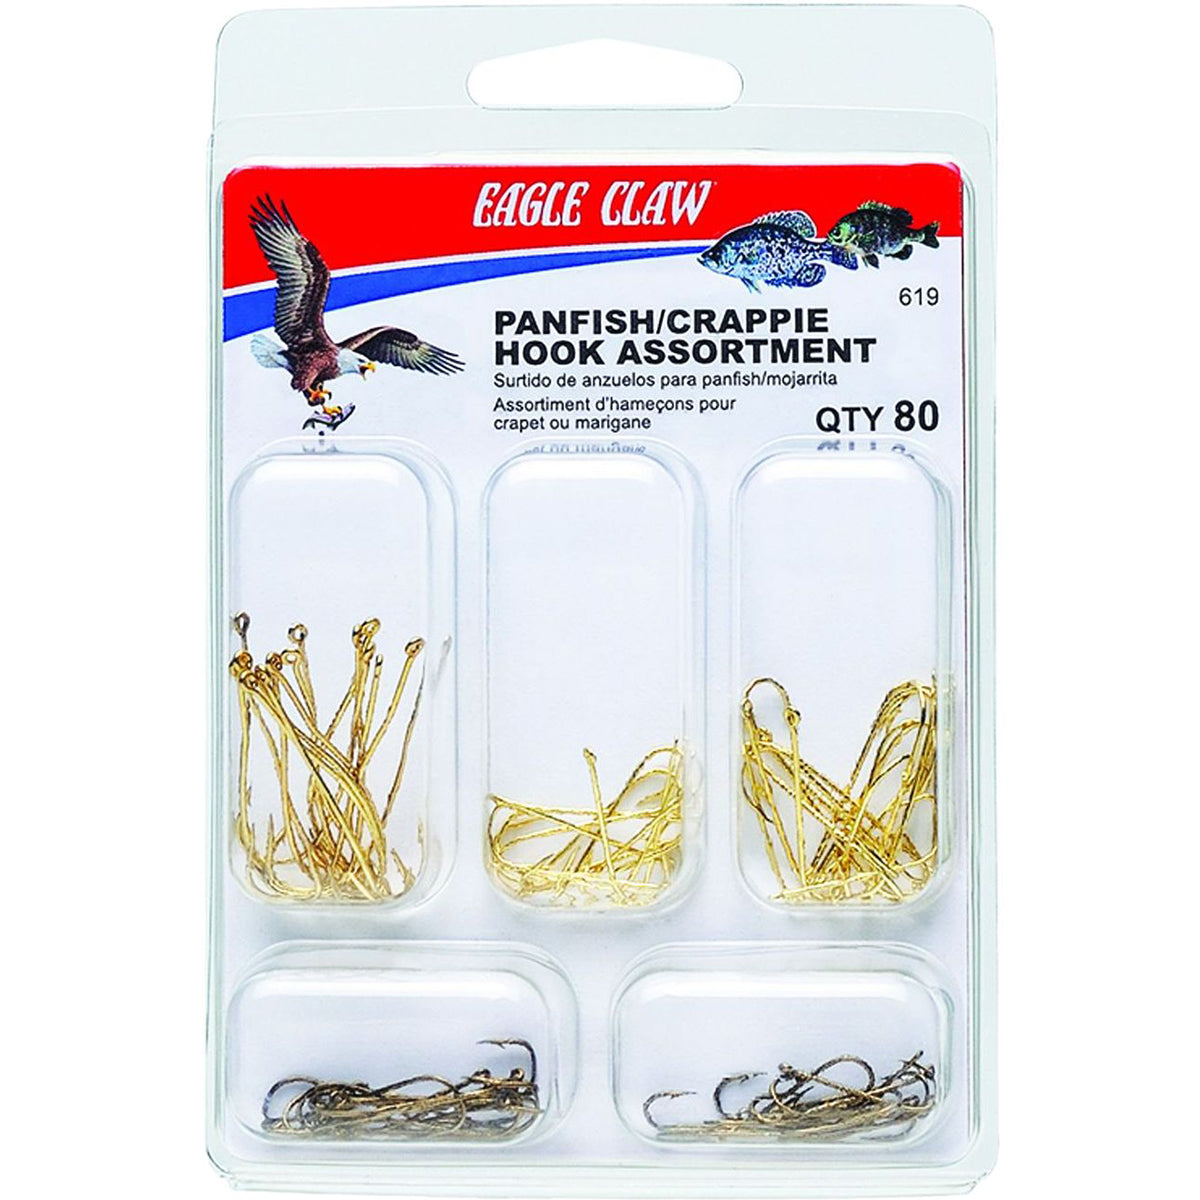 Eagle Claw Crappie/Bream Assorted Hooks Fishing Kit